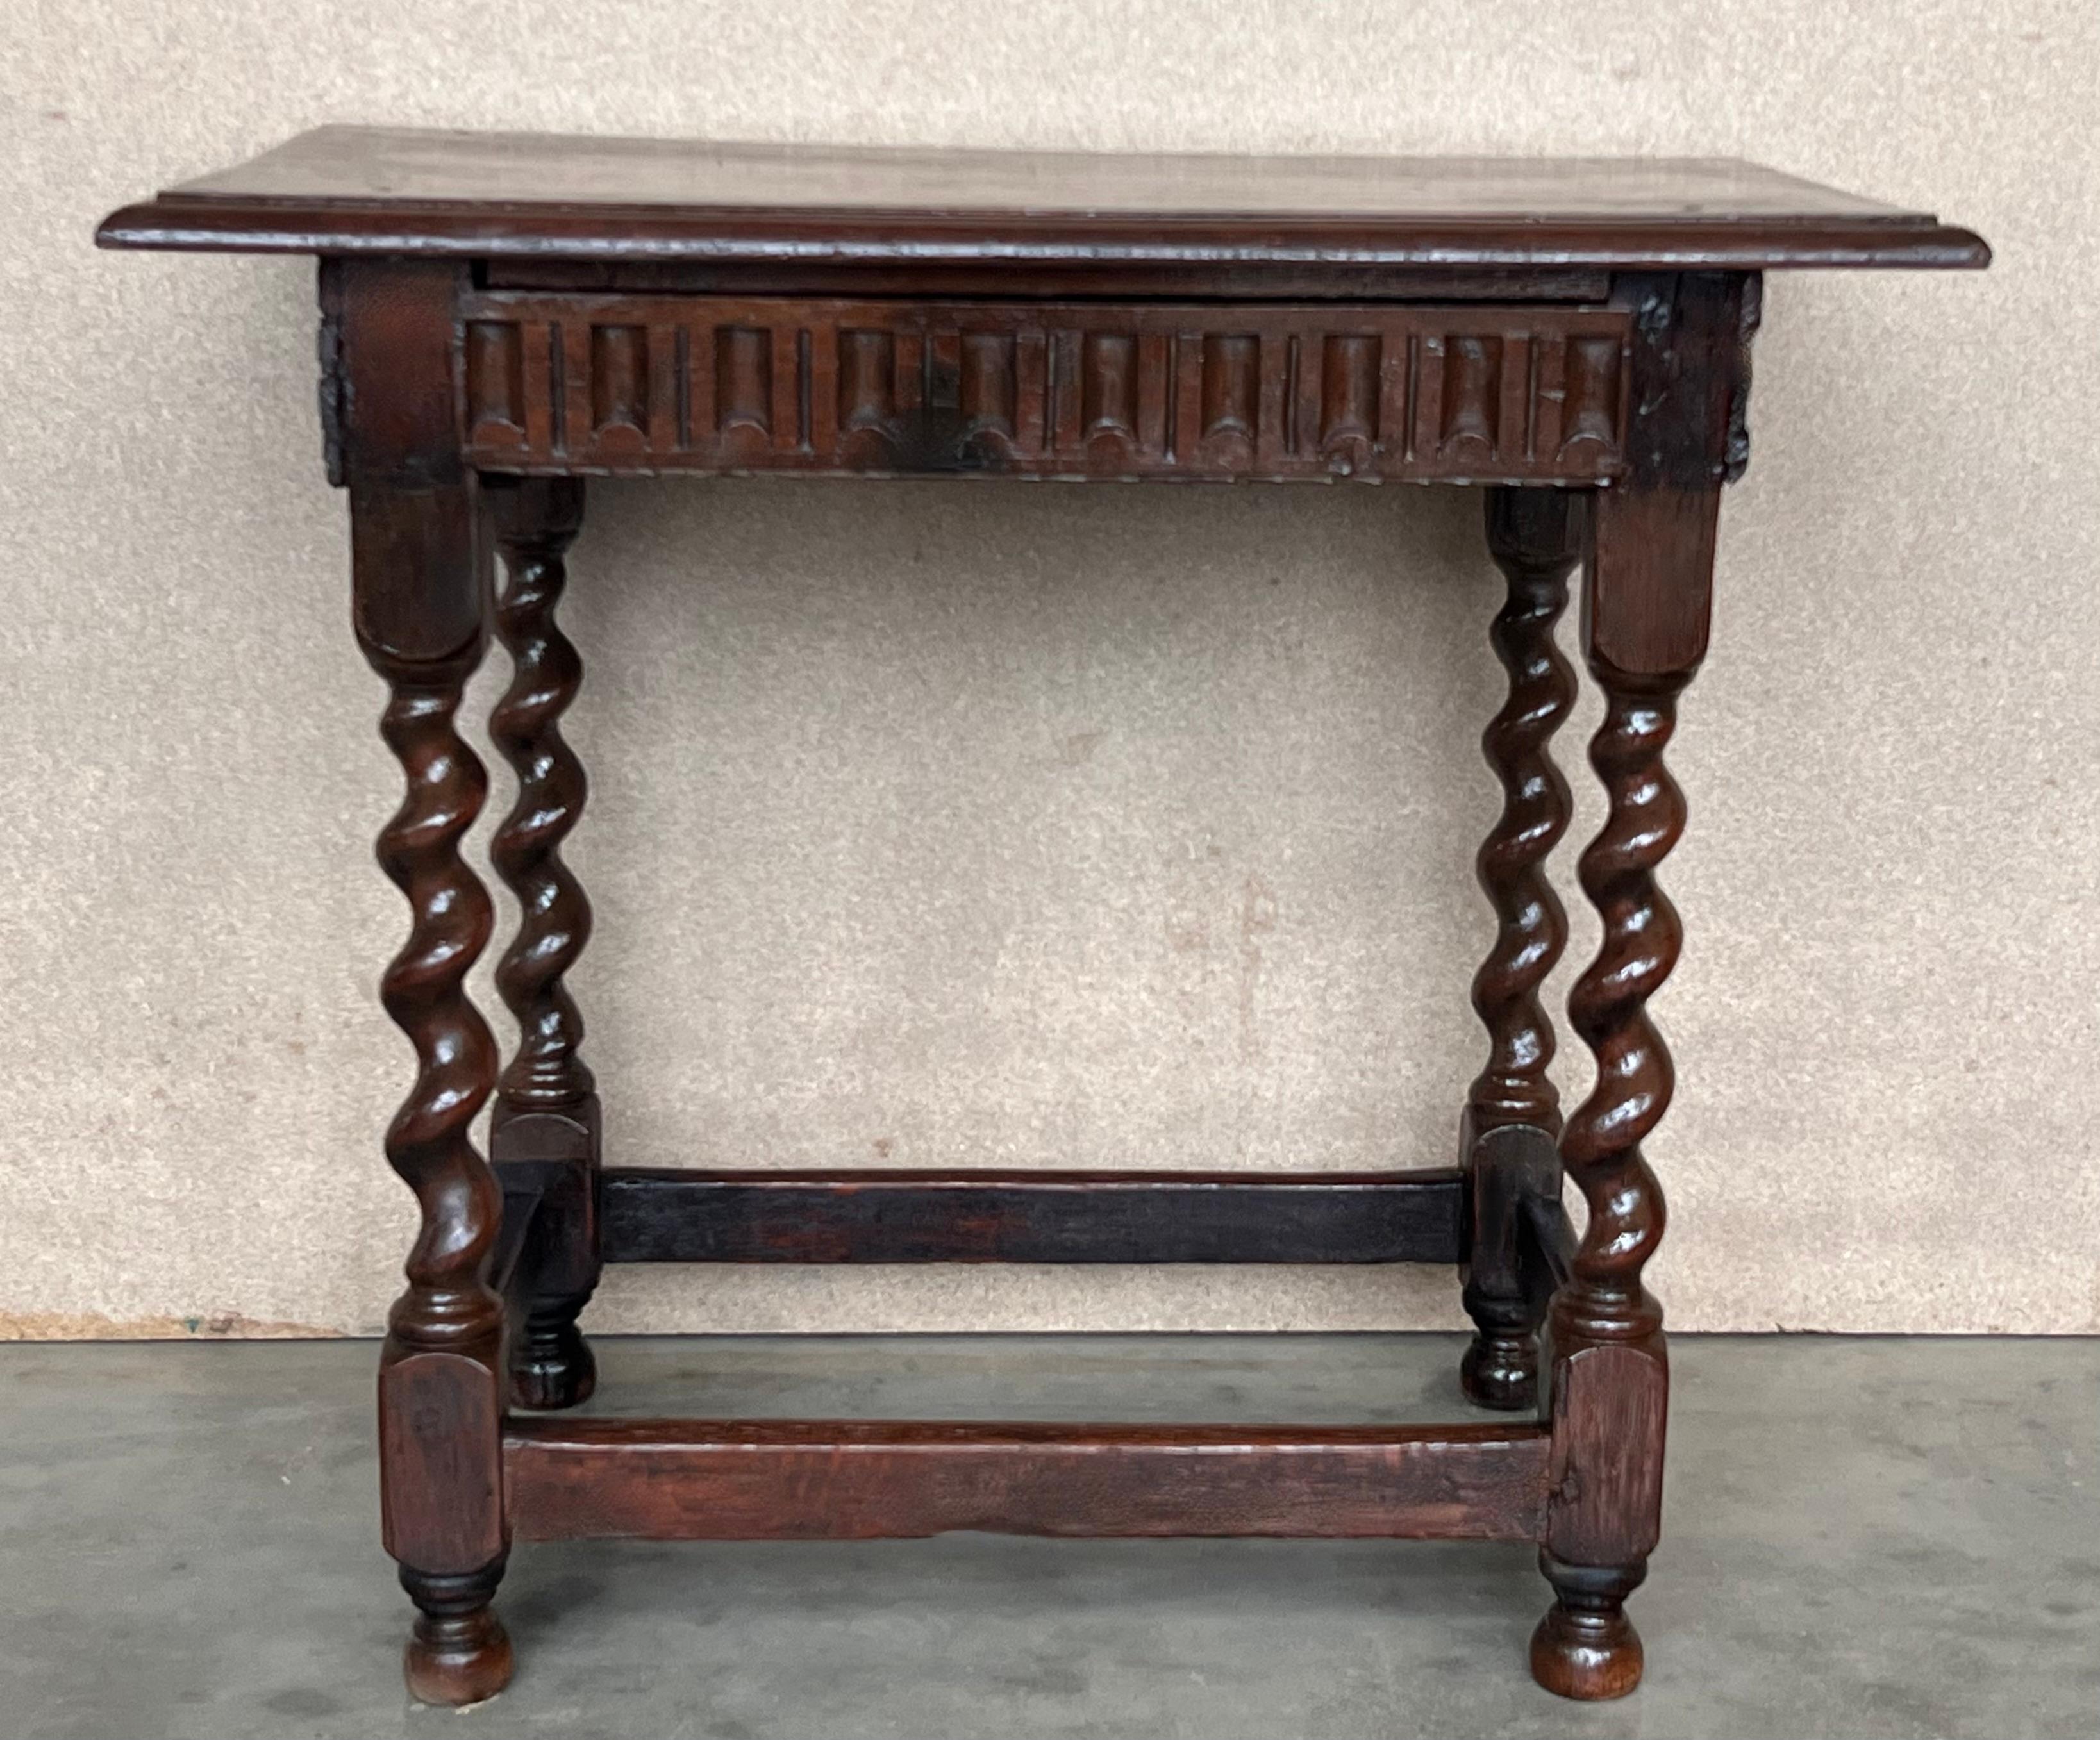 20th century Spanish nightstands in solid walnut with carved drawer and iron hardware.
Beautiful tables that you can use like a nightstands or side tables, end tables, or table lamp.